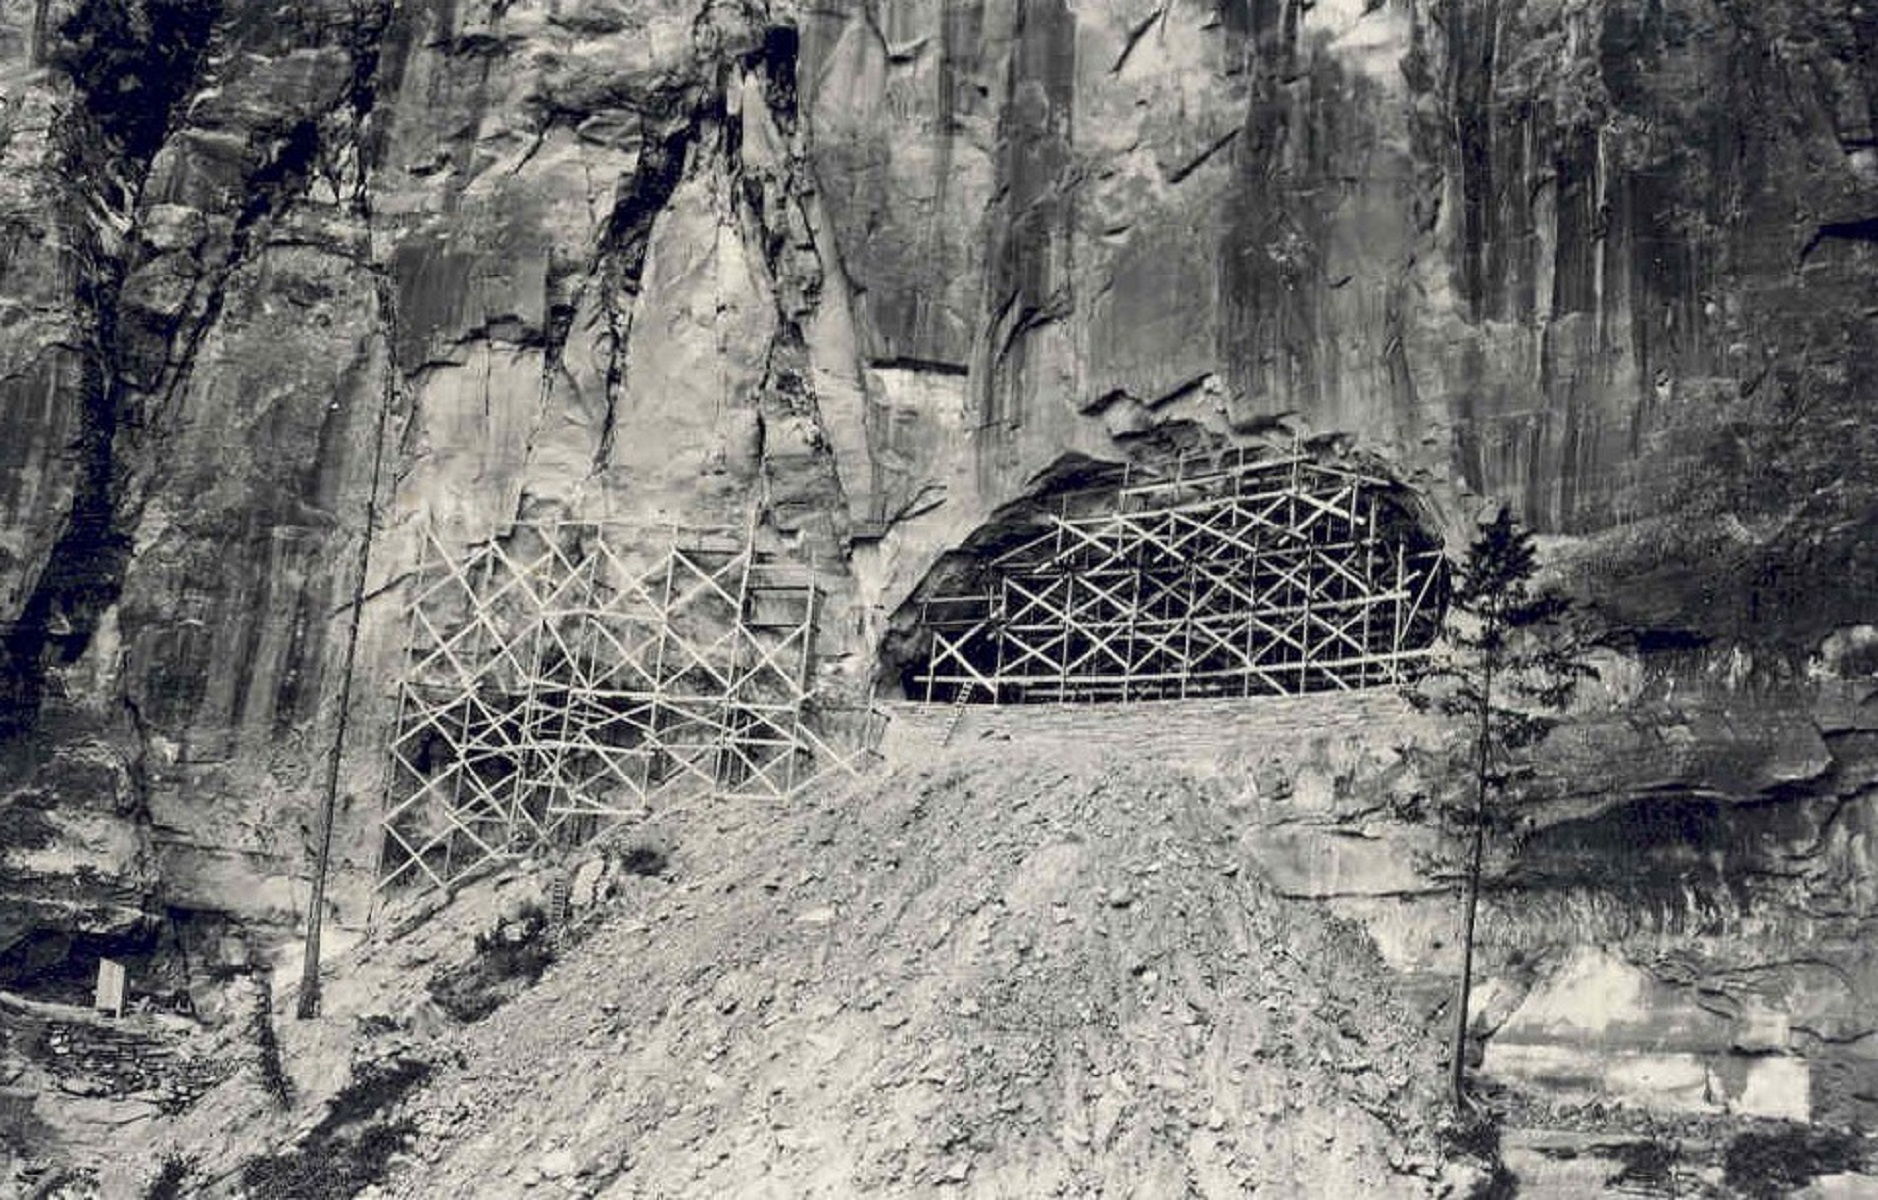 Zion-Mt. Carmel Highway and Tunnel History - Zion National Park (U.S.  National Park Service)